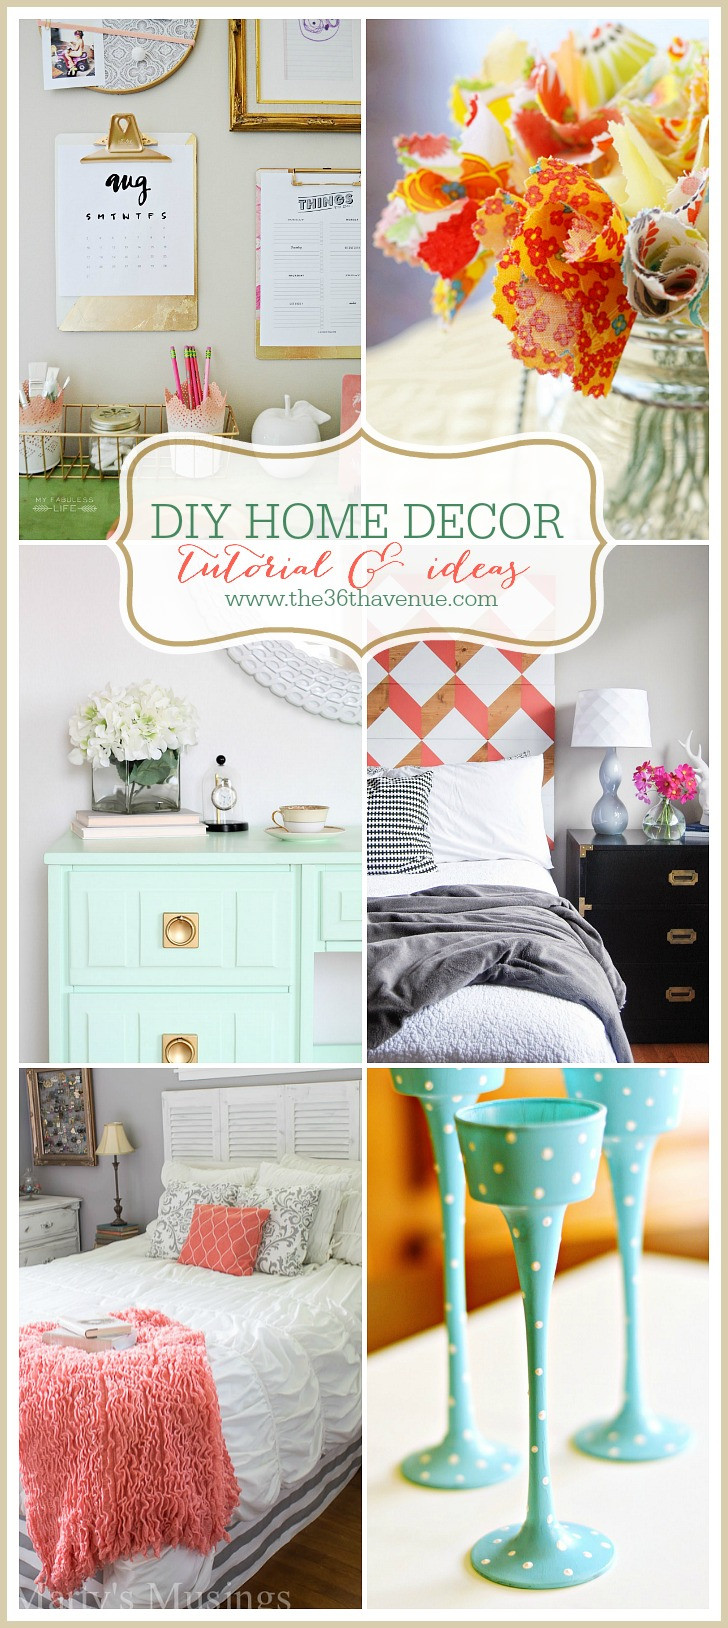 Home Decor DIY
 The 36th AVENUE Home Decor DIY Projects